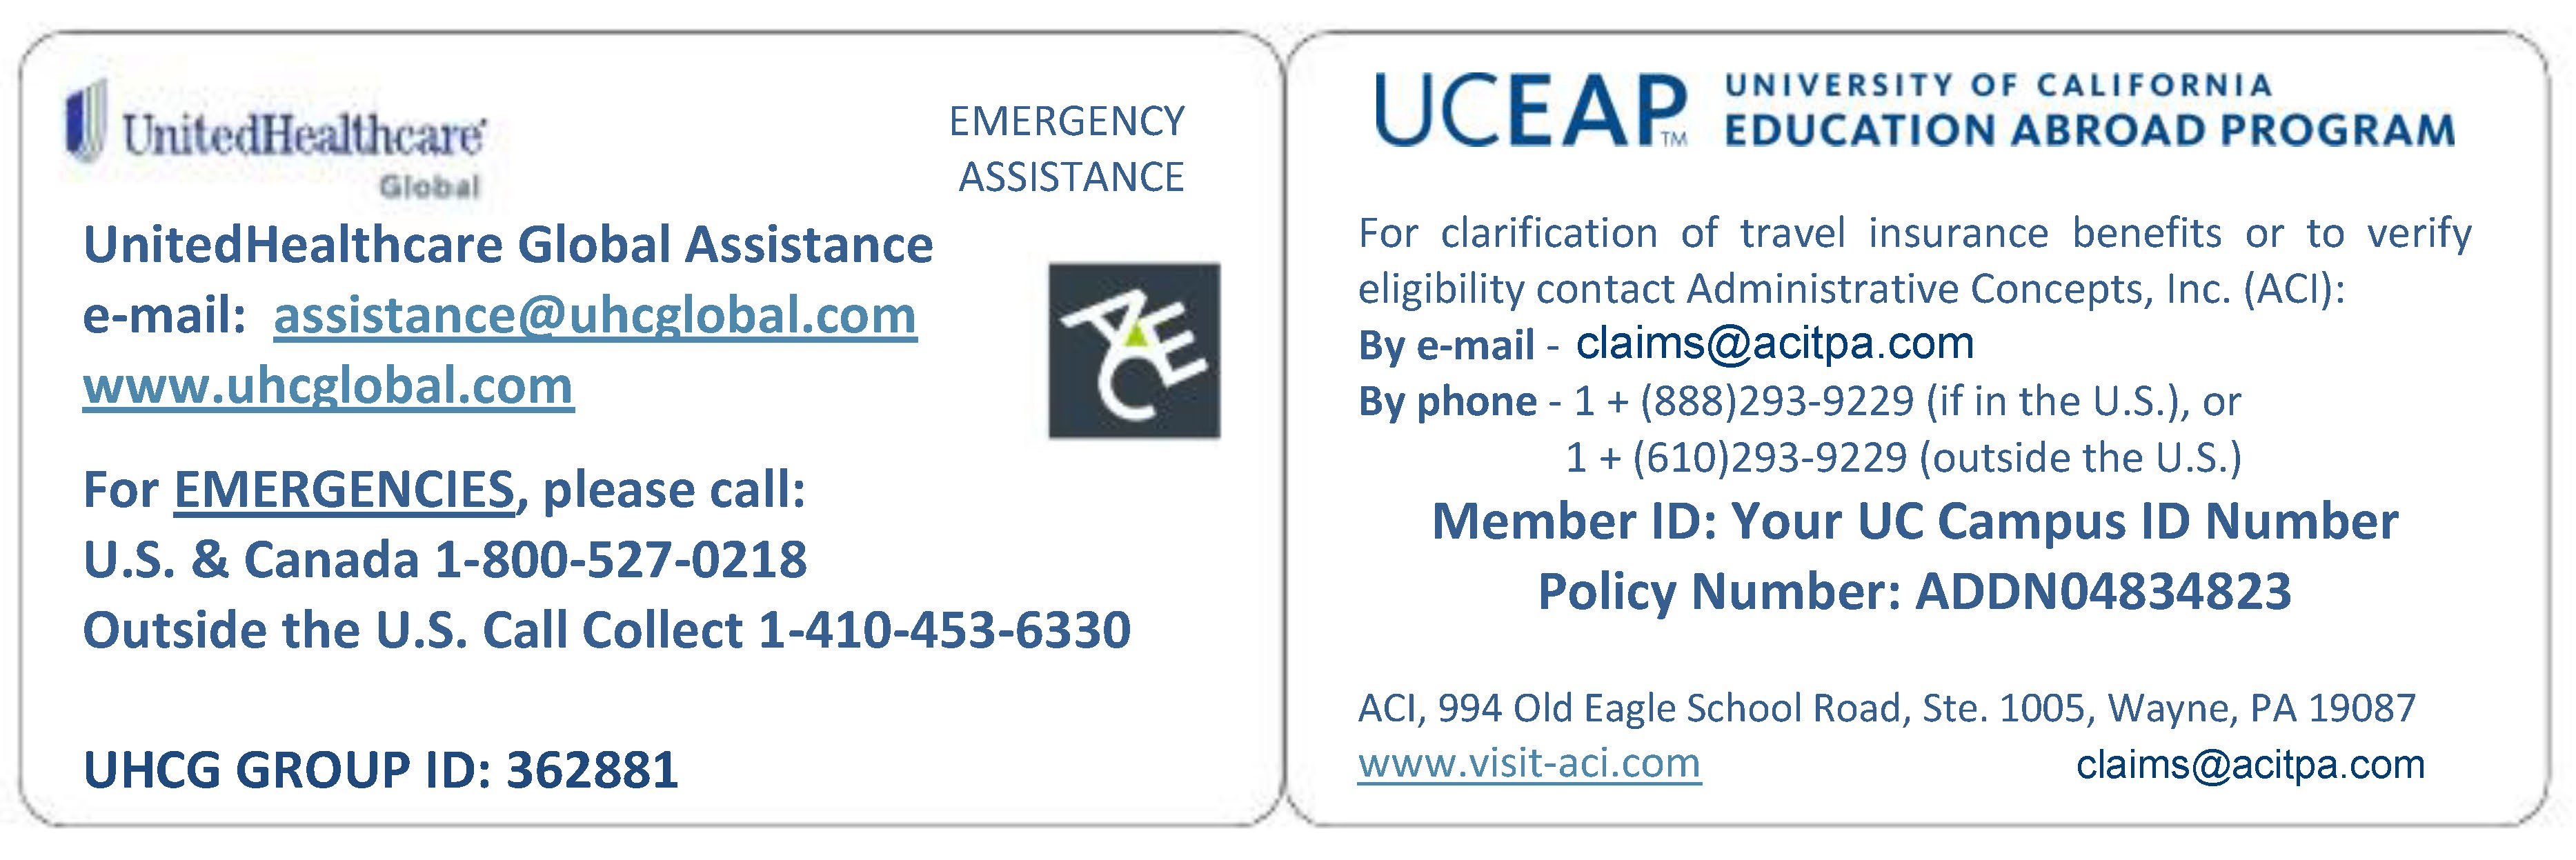 UCEAP Guide To Study Abroad 2010 2011 Document Uceap Travel Insurance Card